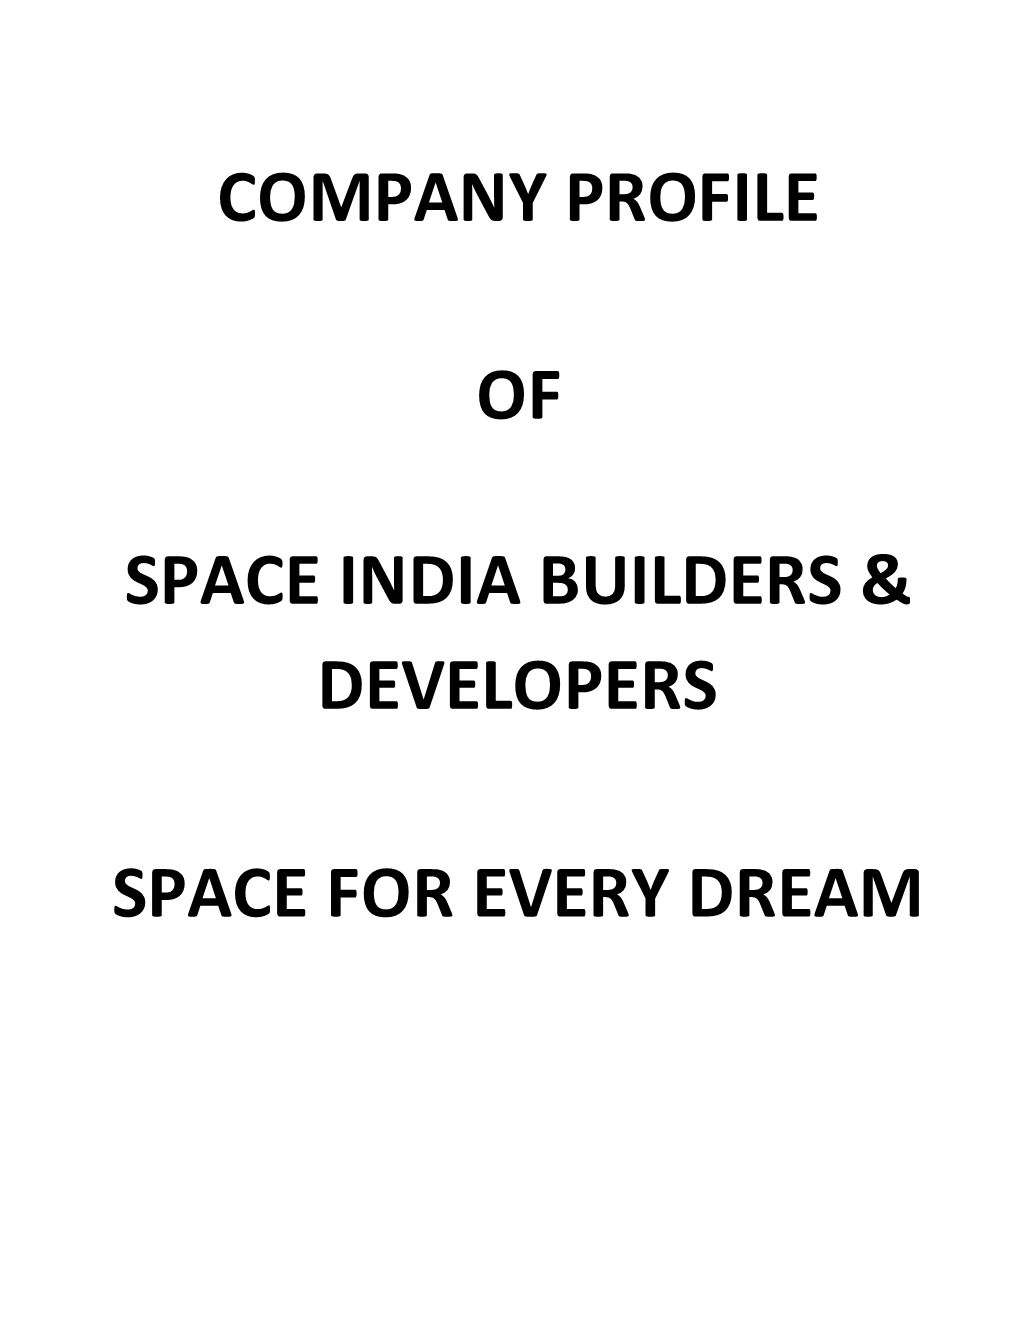 Company Profile of Space India Builders & Developers